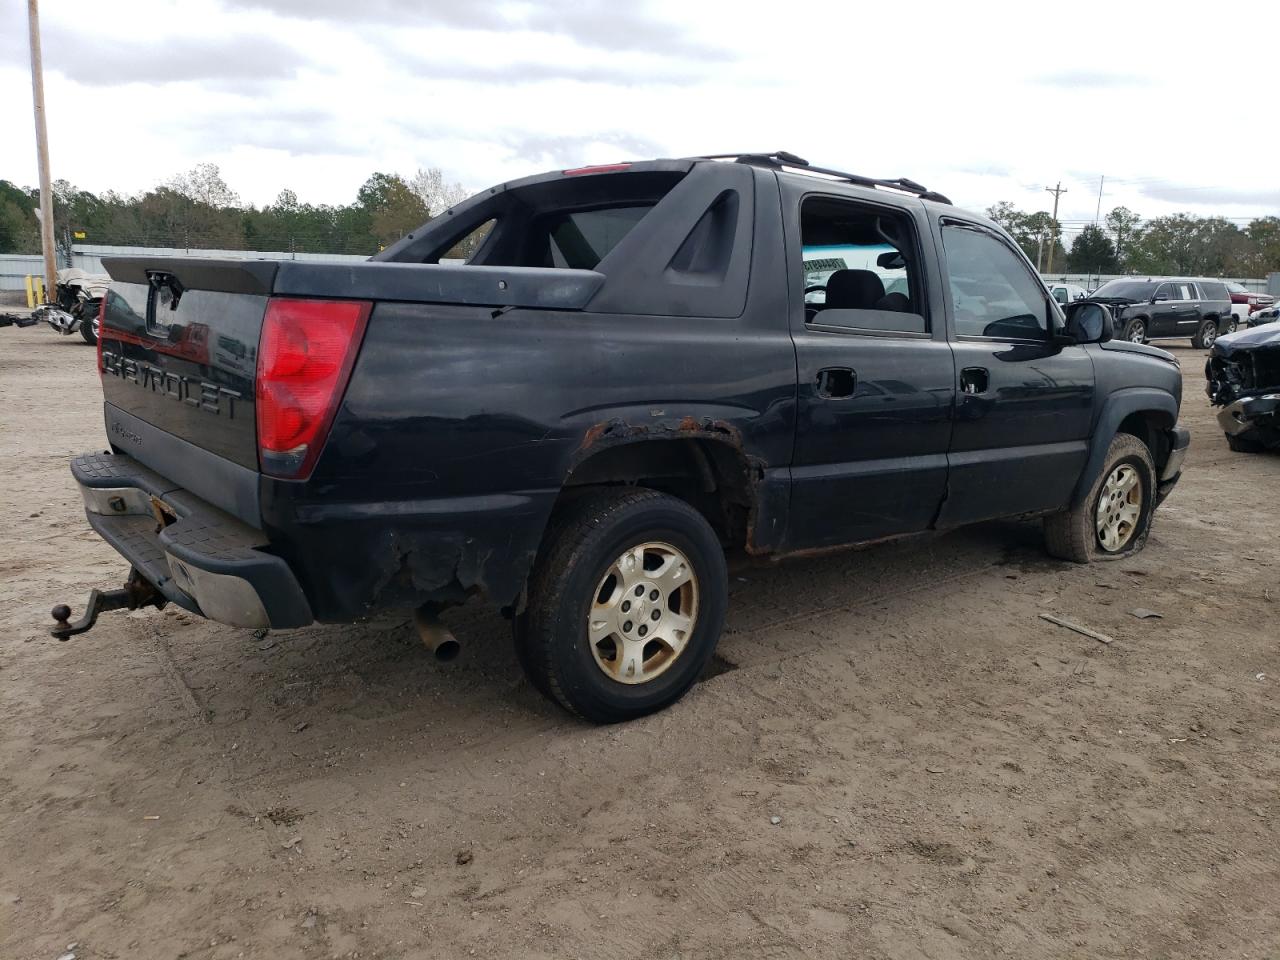 3GNEK12T84G****** Salvage and Repairable 2004 Chevrolet Avalanche in AL - Newton